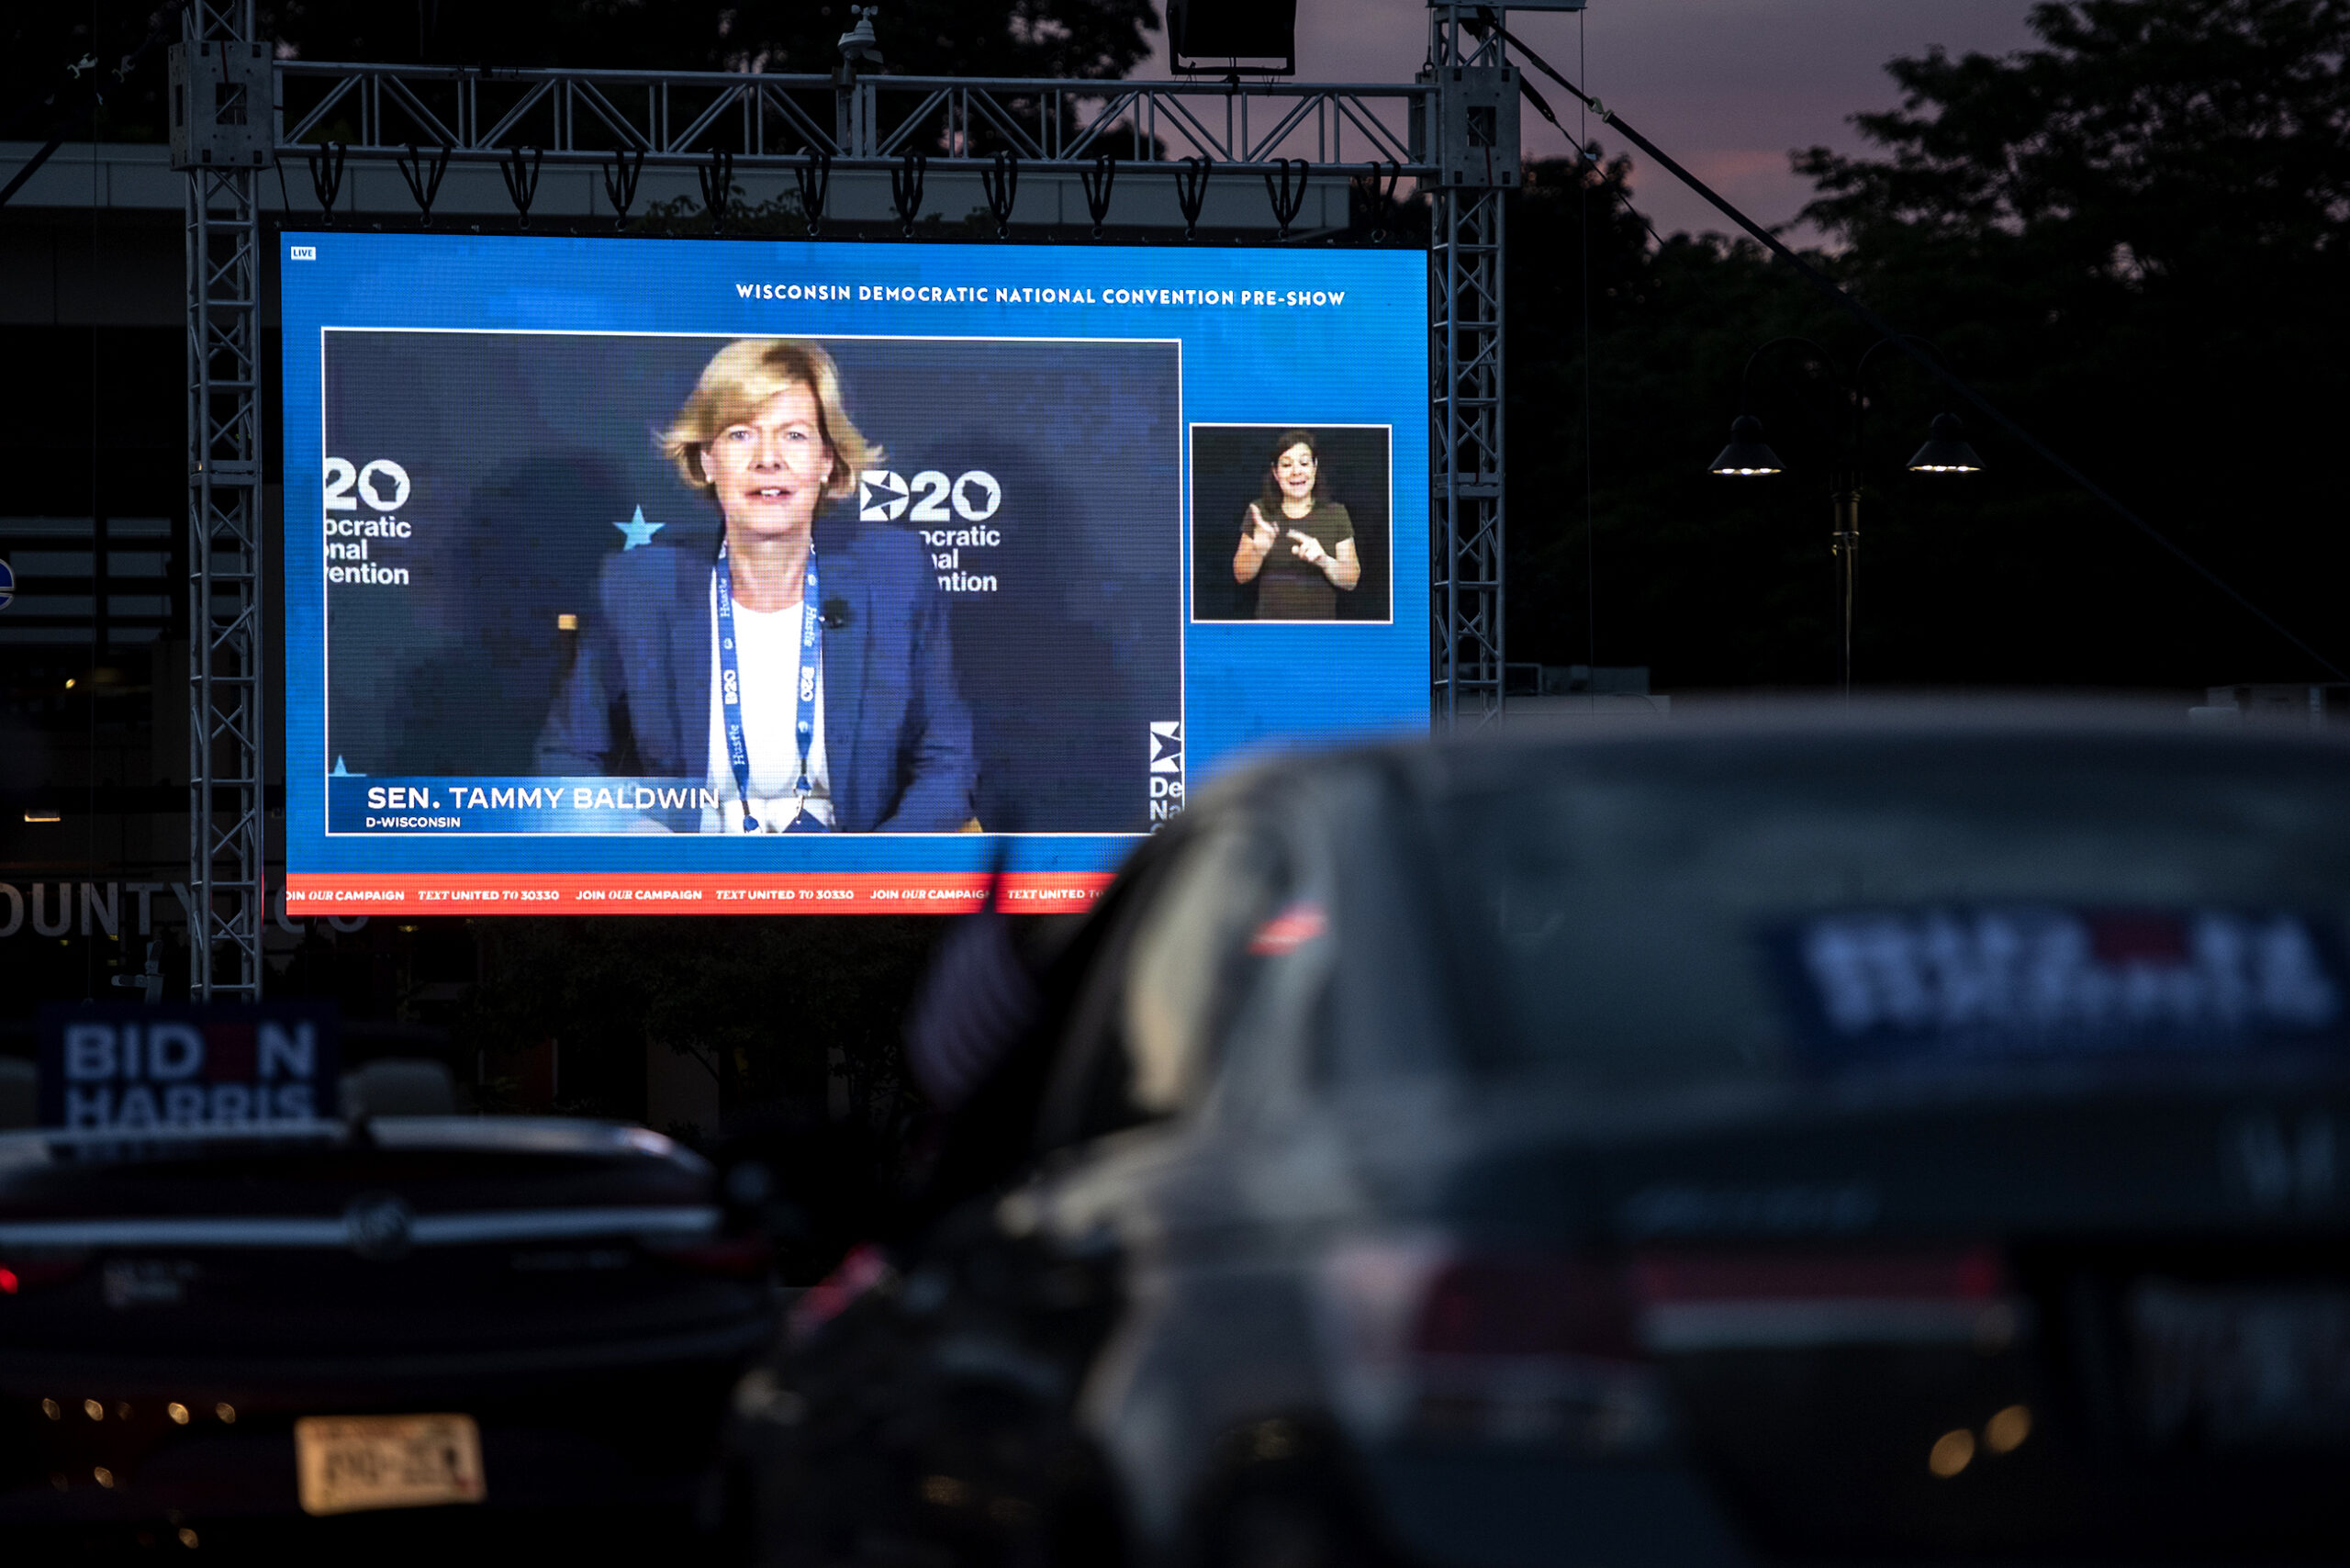 Cars are parked in front of a large screen showing Tammy Baldwin